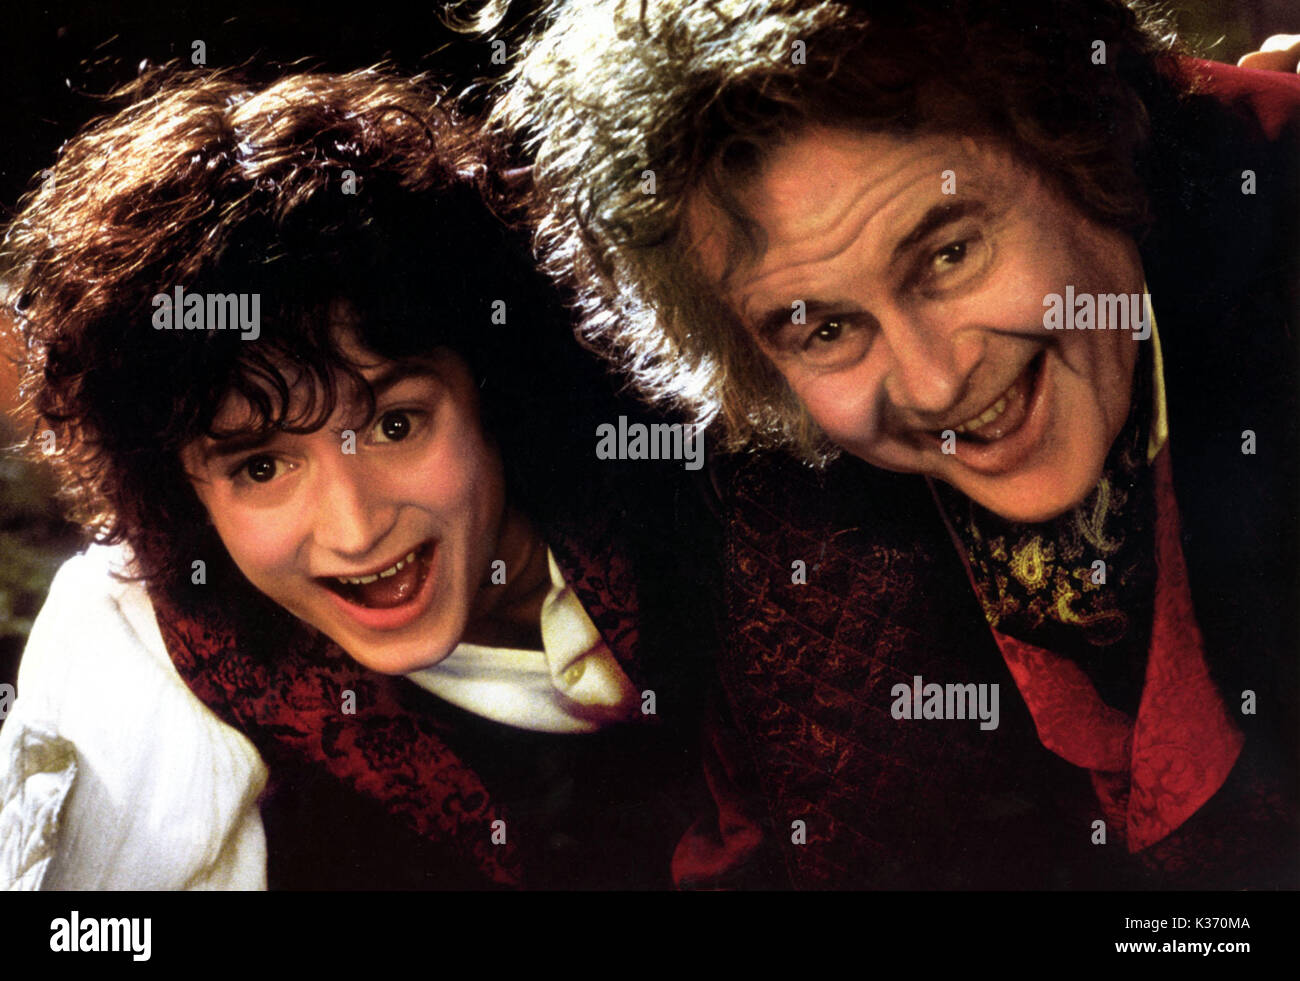 THE LORD OF THE RINGS: THE FELLOWSHIP OF THE RING ELIJAH WOOD as Frodo, IAN HOLM as Bilbo Baggins YOU MUST CREDIT: NEW LINE CINEMA     Date: 2001 Stock Photo